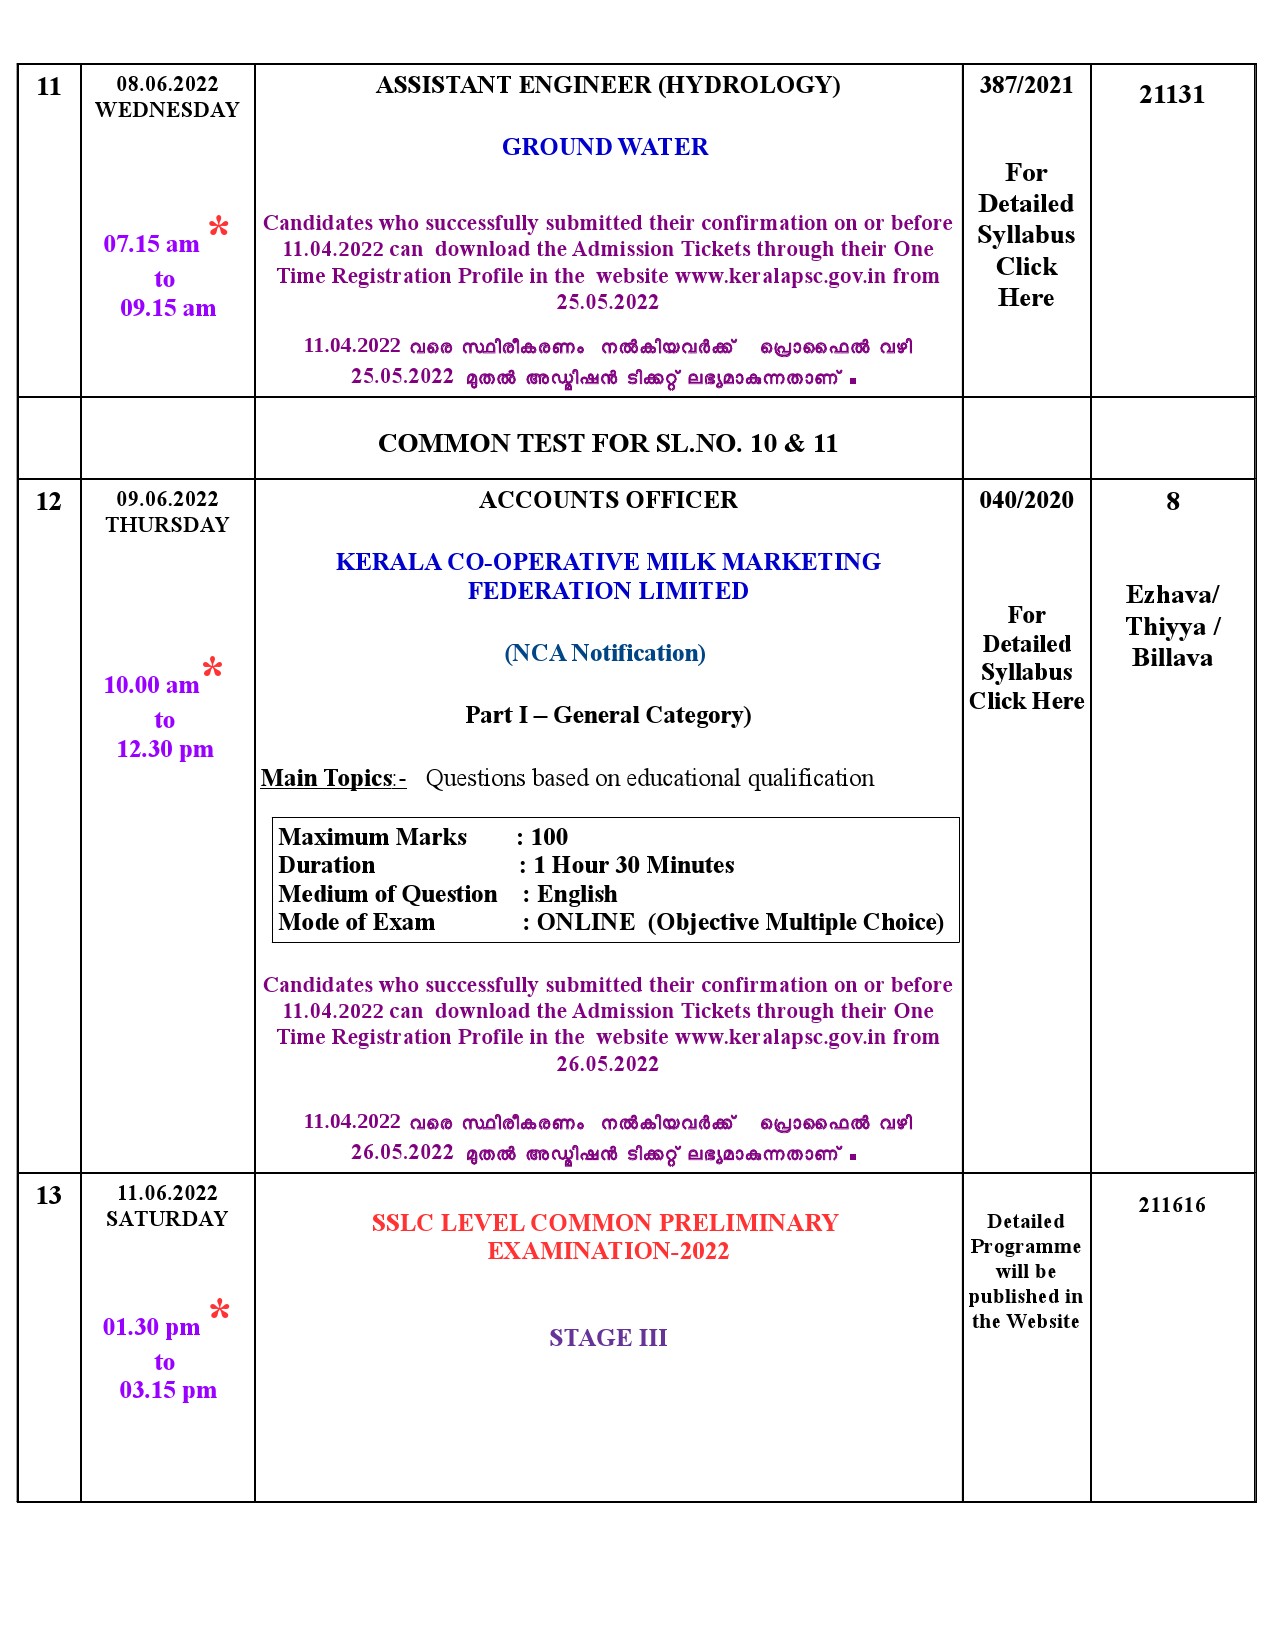 KPSC MODIFIED EXAMINATION PROGRAMME FOR THE MONTH OF JUNE 2022 - Notification Image 6